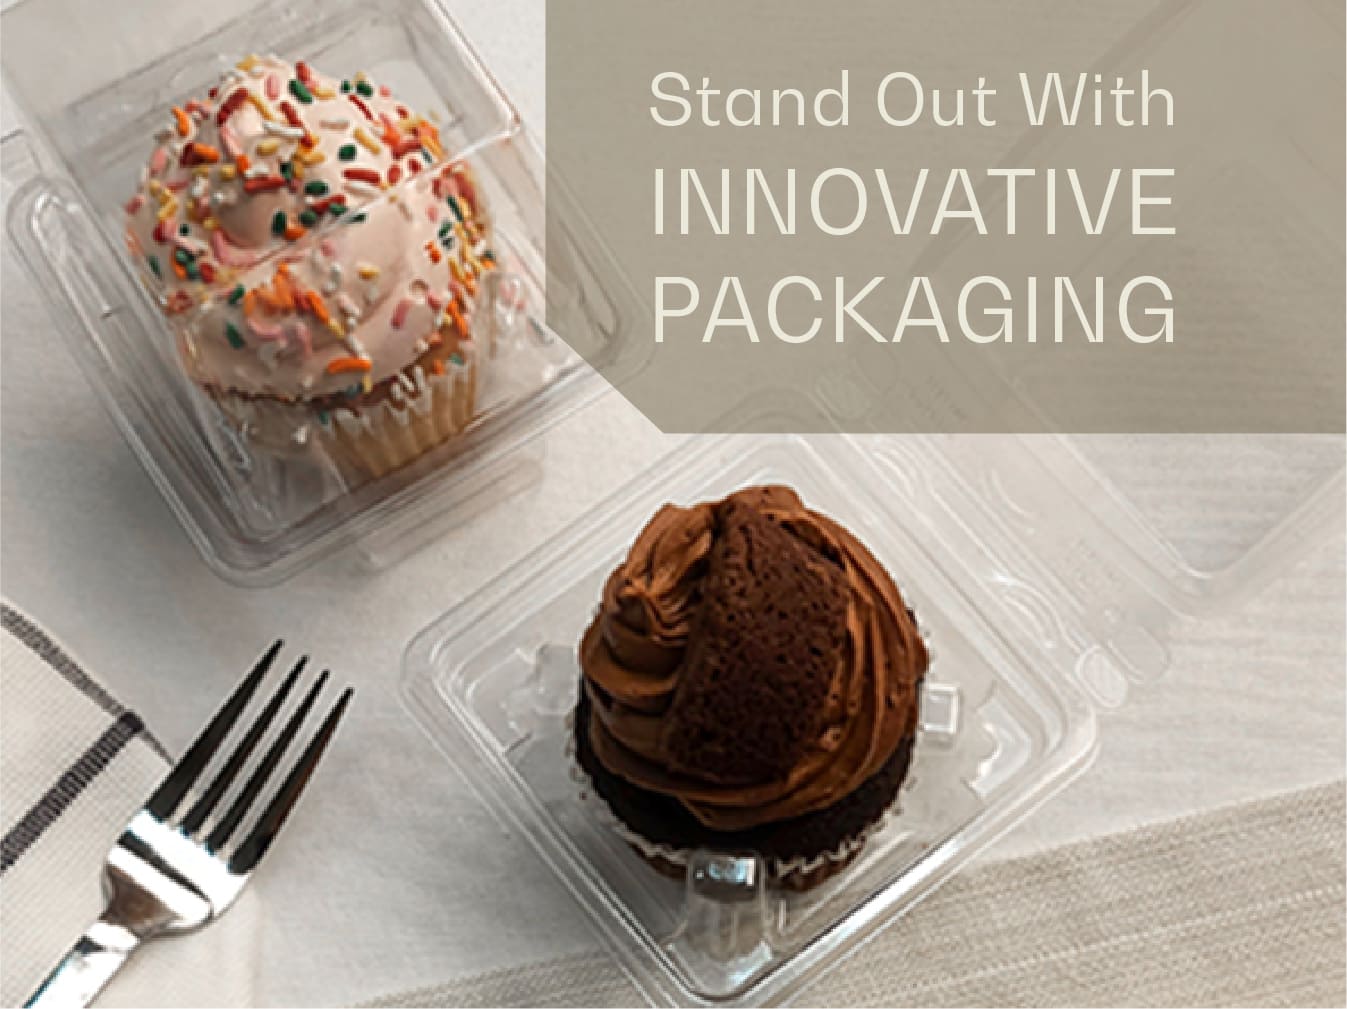 How to Create Innovative Food Packaging Design featured image